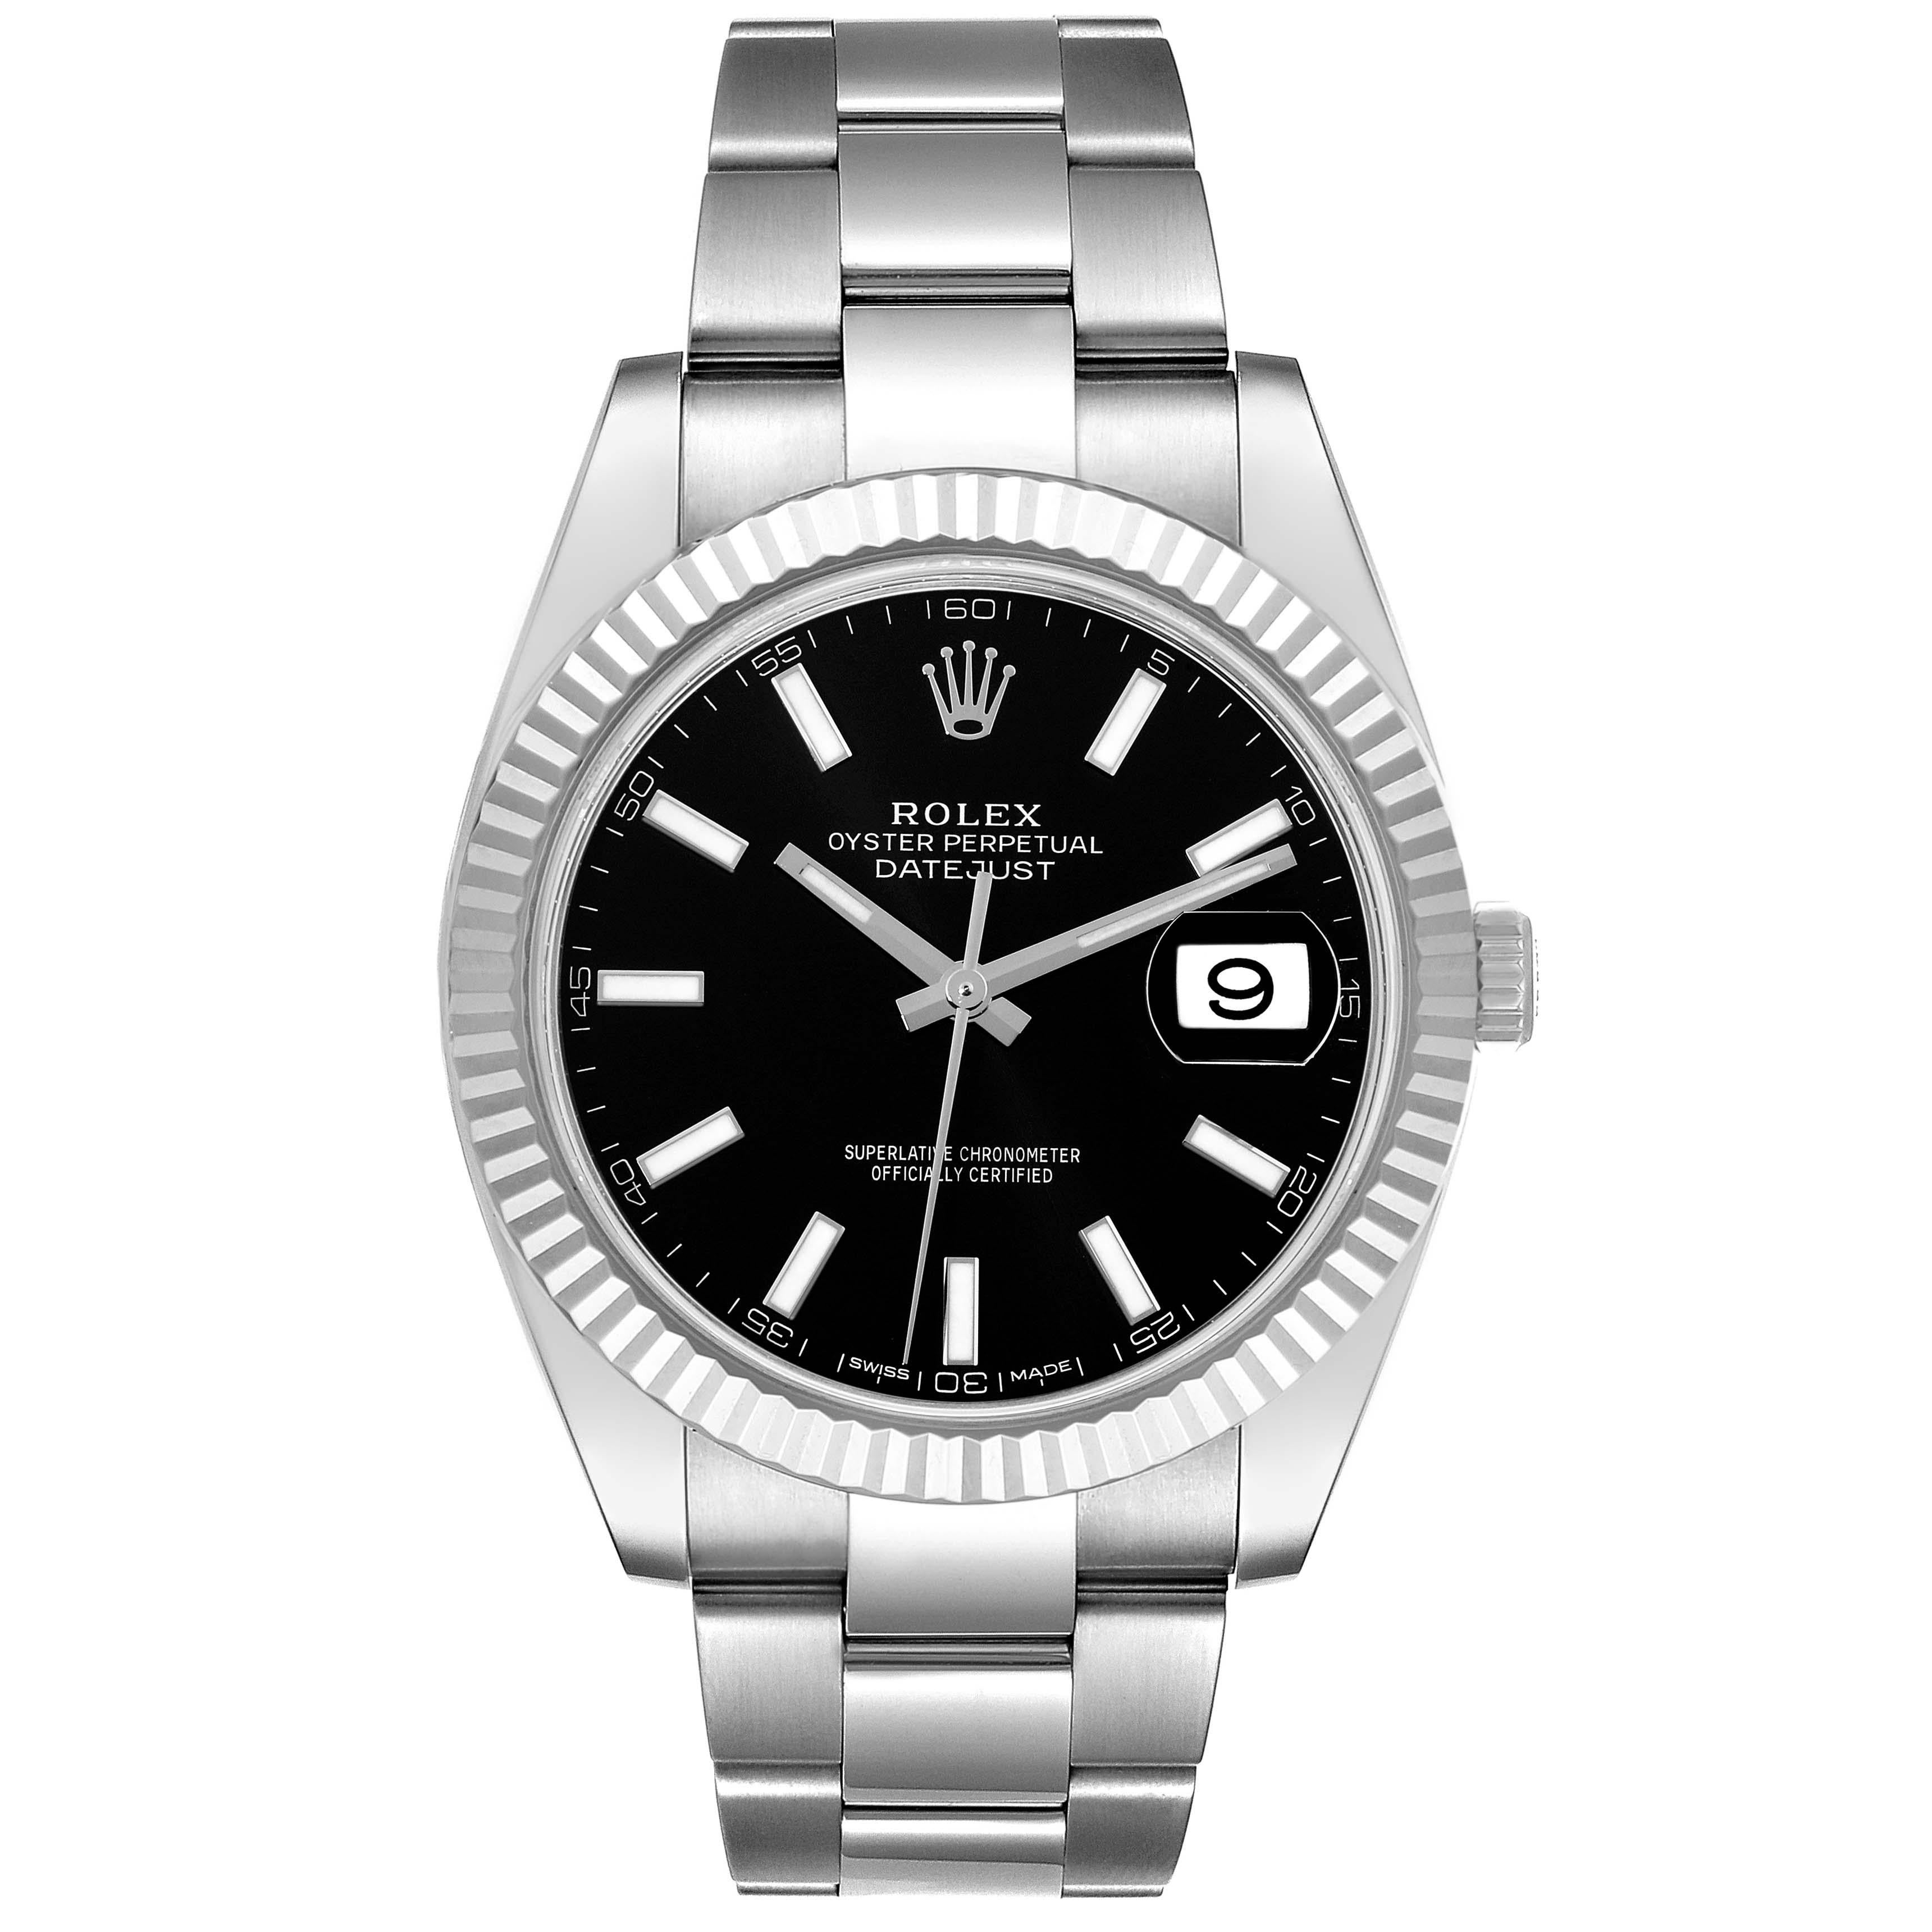 Rolex Datejust 41 Steel White Gold Black Dial Mens Watch 126334 Box Card. Officially certified chronometer automatic self-winding movement. Stainless steel case 41 mm in diameter. Rolex logo on the crown. 18K white gold fluted bezel. Scratch